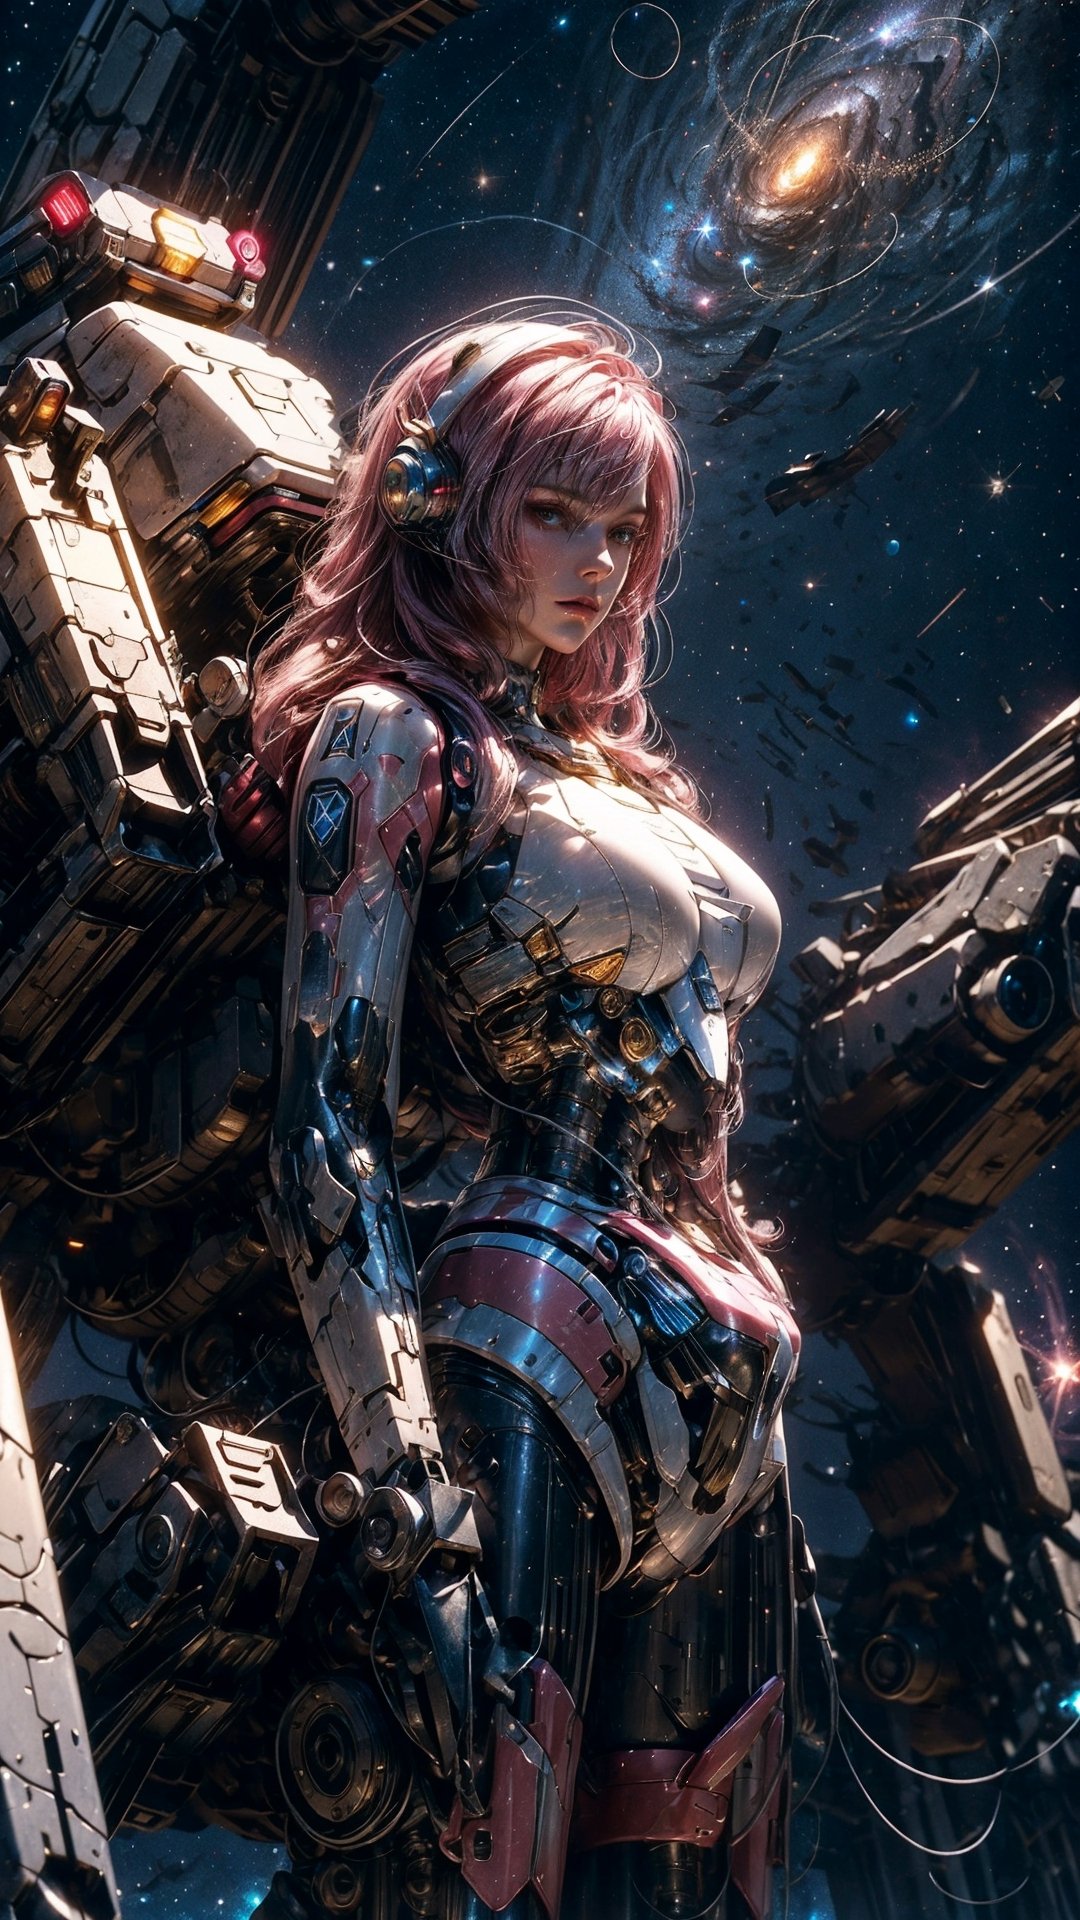 (32k), (masterpiece), (best quality),(extremely intricate), (realistic), (sharp focus), (award winning), (cinematic lighting), (extremely detailed), 

A female titan with long, flowing pink hair stands tall in the cockpit of her towering black mech suit, her face illuminated by the glow of the stars. The mech suit is a marvel of destruction, with sleek lines and powerful weaponry. The woman herself is a skilled warrior, trained in the arts of combat and piloting.

She is standing in front of a vast nebula, its swirling colors creating a breathtaking backdrop. The nebula is home to a variety of alien lifeforms, some of which are hostile to humanity. But the woman is not afraid. She is here to protect her people and to explore the unknown.

She raises her fist in a gesture of defiance, and her mech suit roars to life. She is ready to face whatever challenges the nebula may throw her way.

Details:

The woman is a space mecha pilot / space warrior.
She has long, flowing pink hair.
She is wearing a white bodytight spacesuit.
She is standing in the cockpit of her towering white mech suit.
She is standing in front of a vast nebula.
She raises her fist in a gesture of defiance.,mecha ,mecha